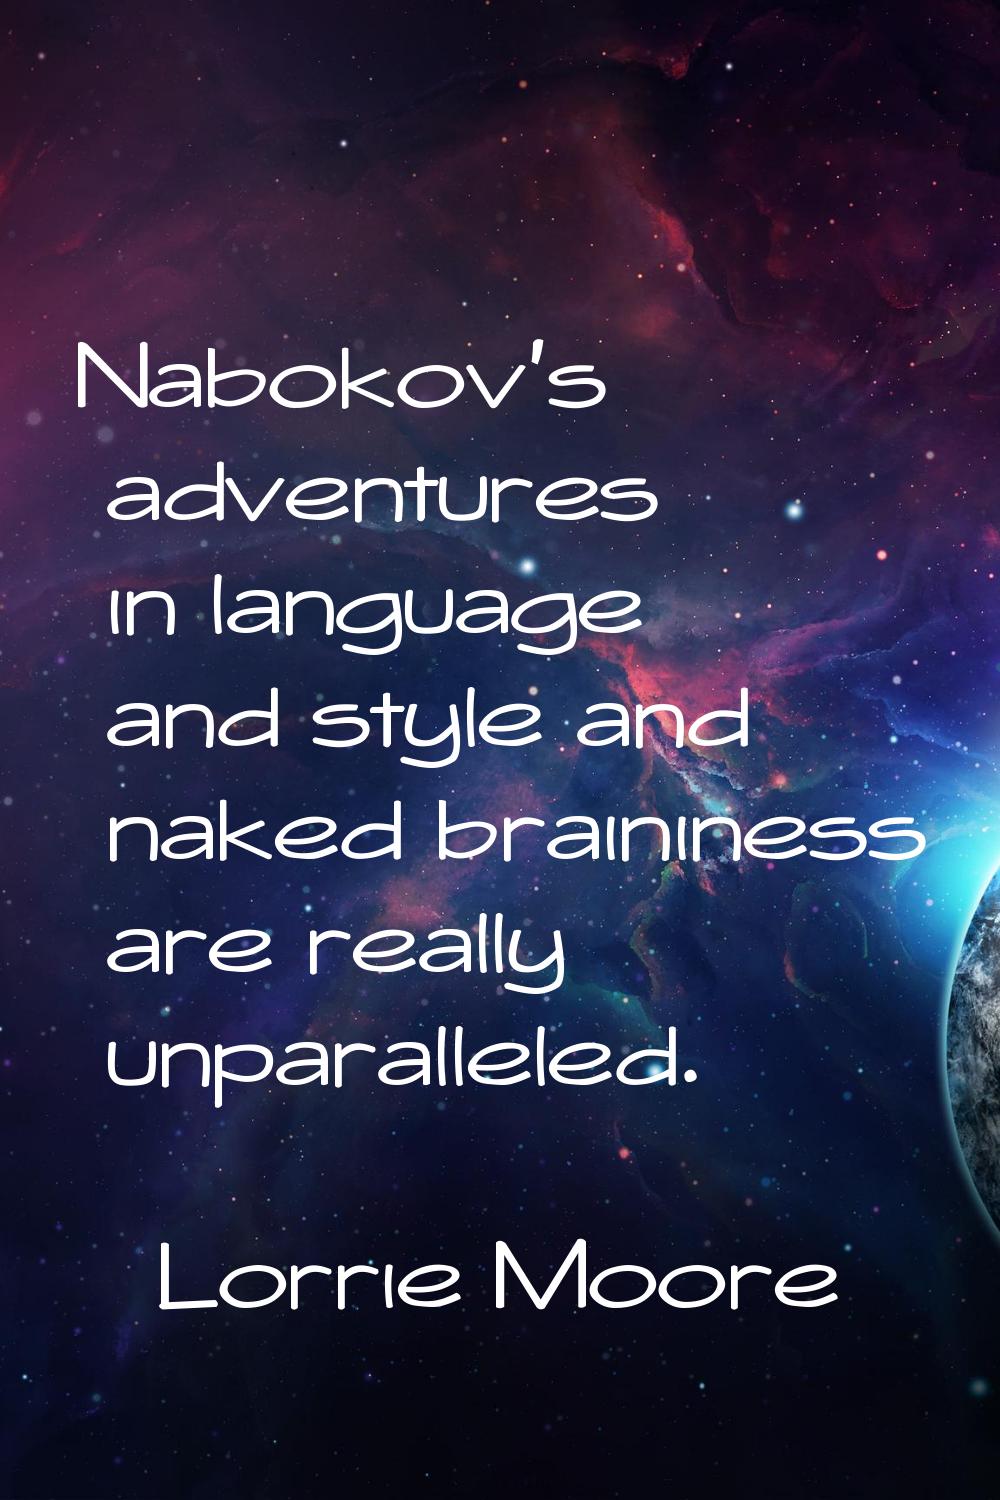 Nabokov's adventures in language and style and naked braininess are really unparalleled.